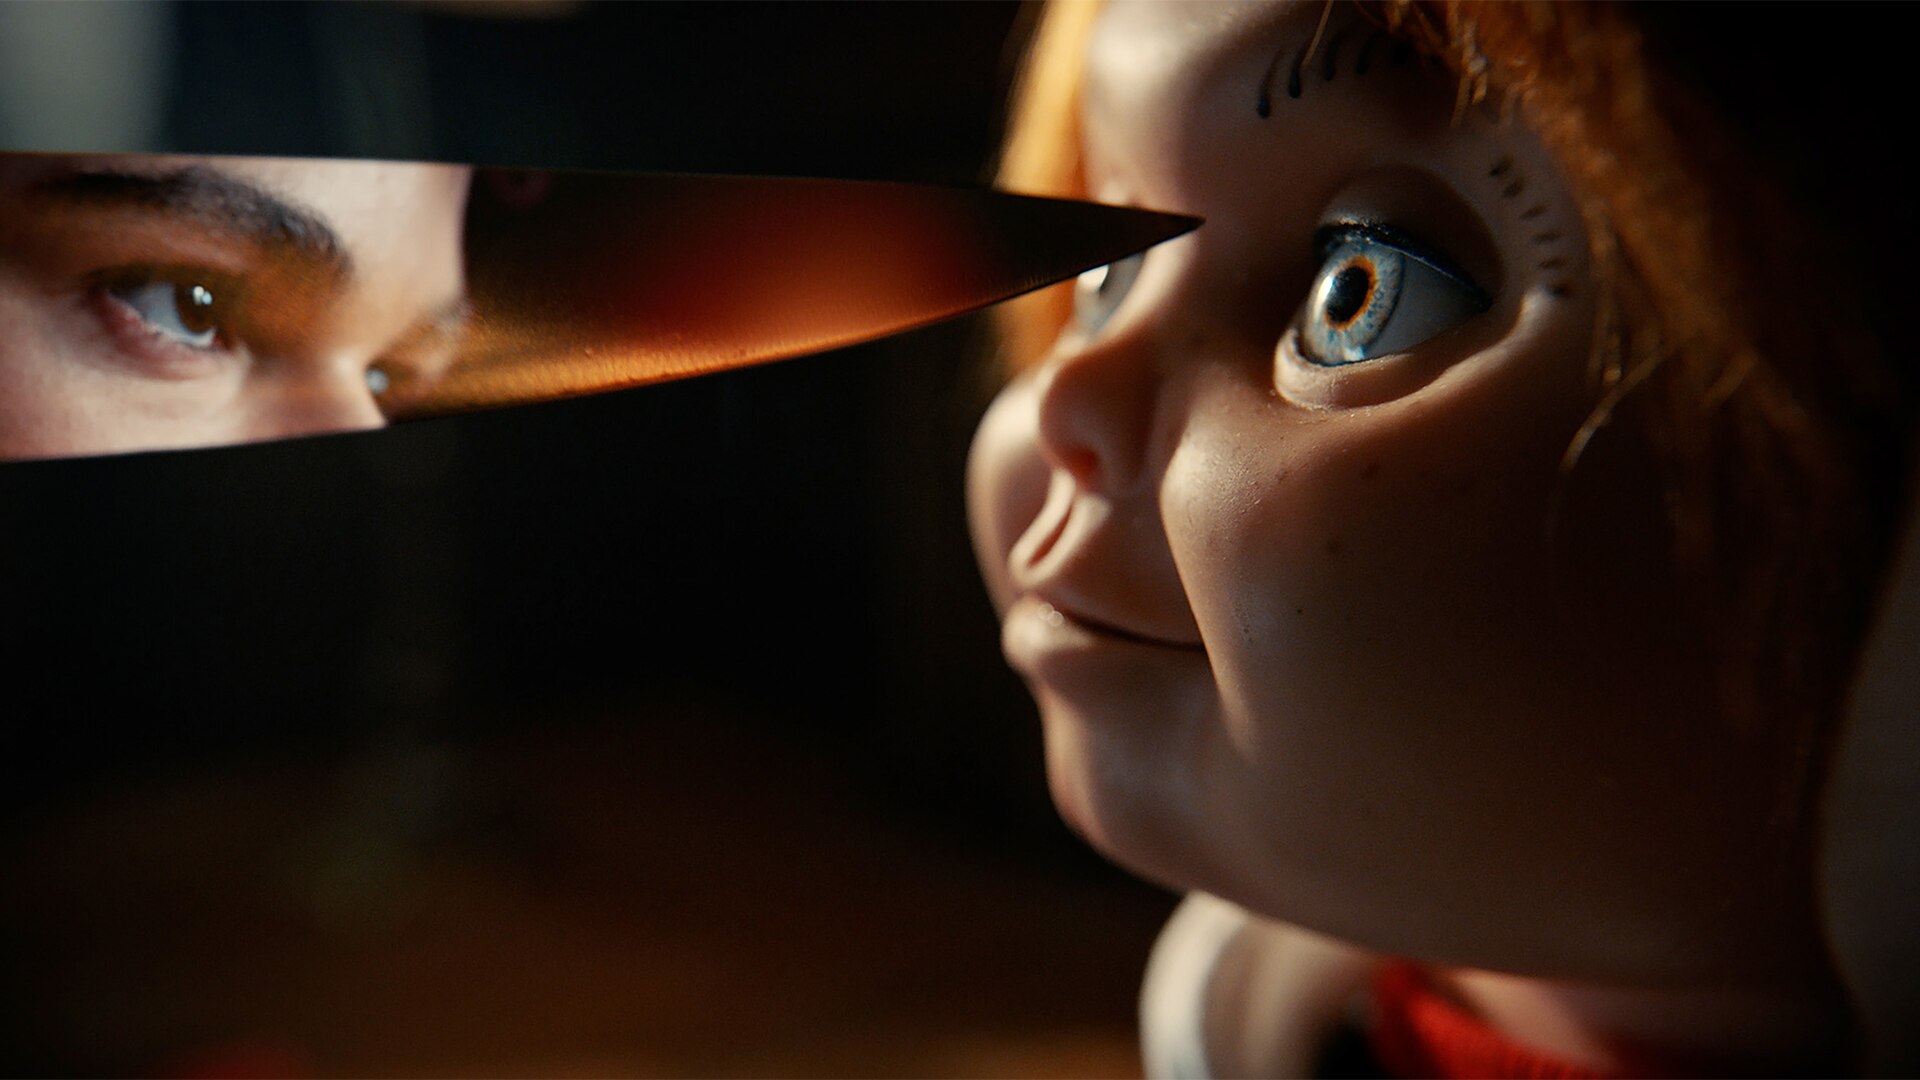 How to watch and stream Child's Play 3 - 1991 on Roku